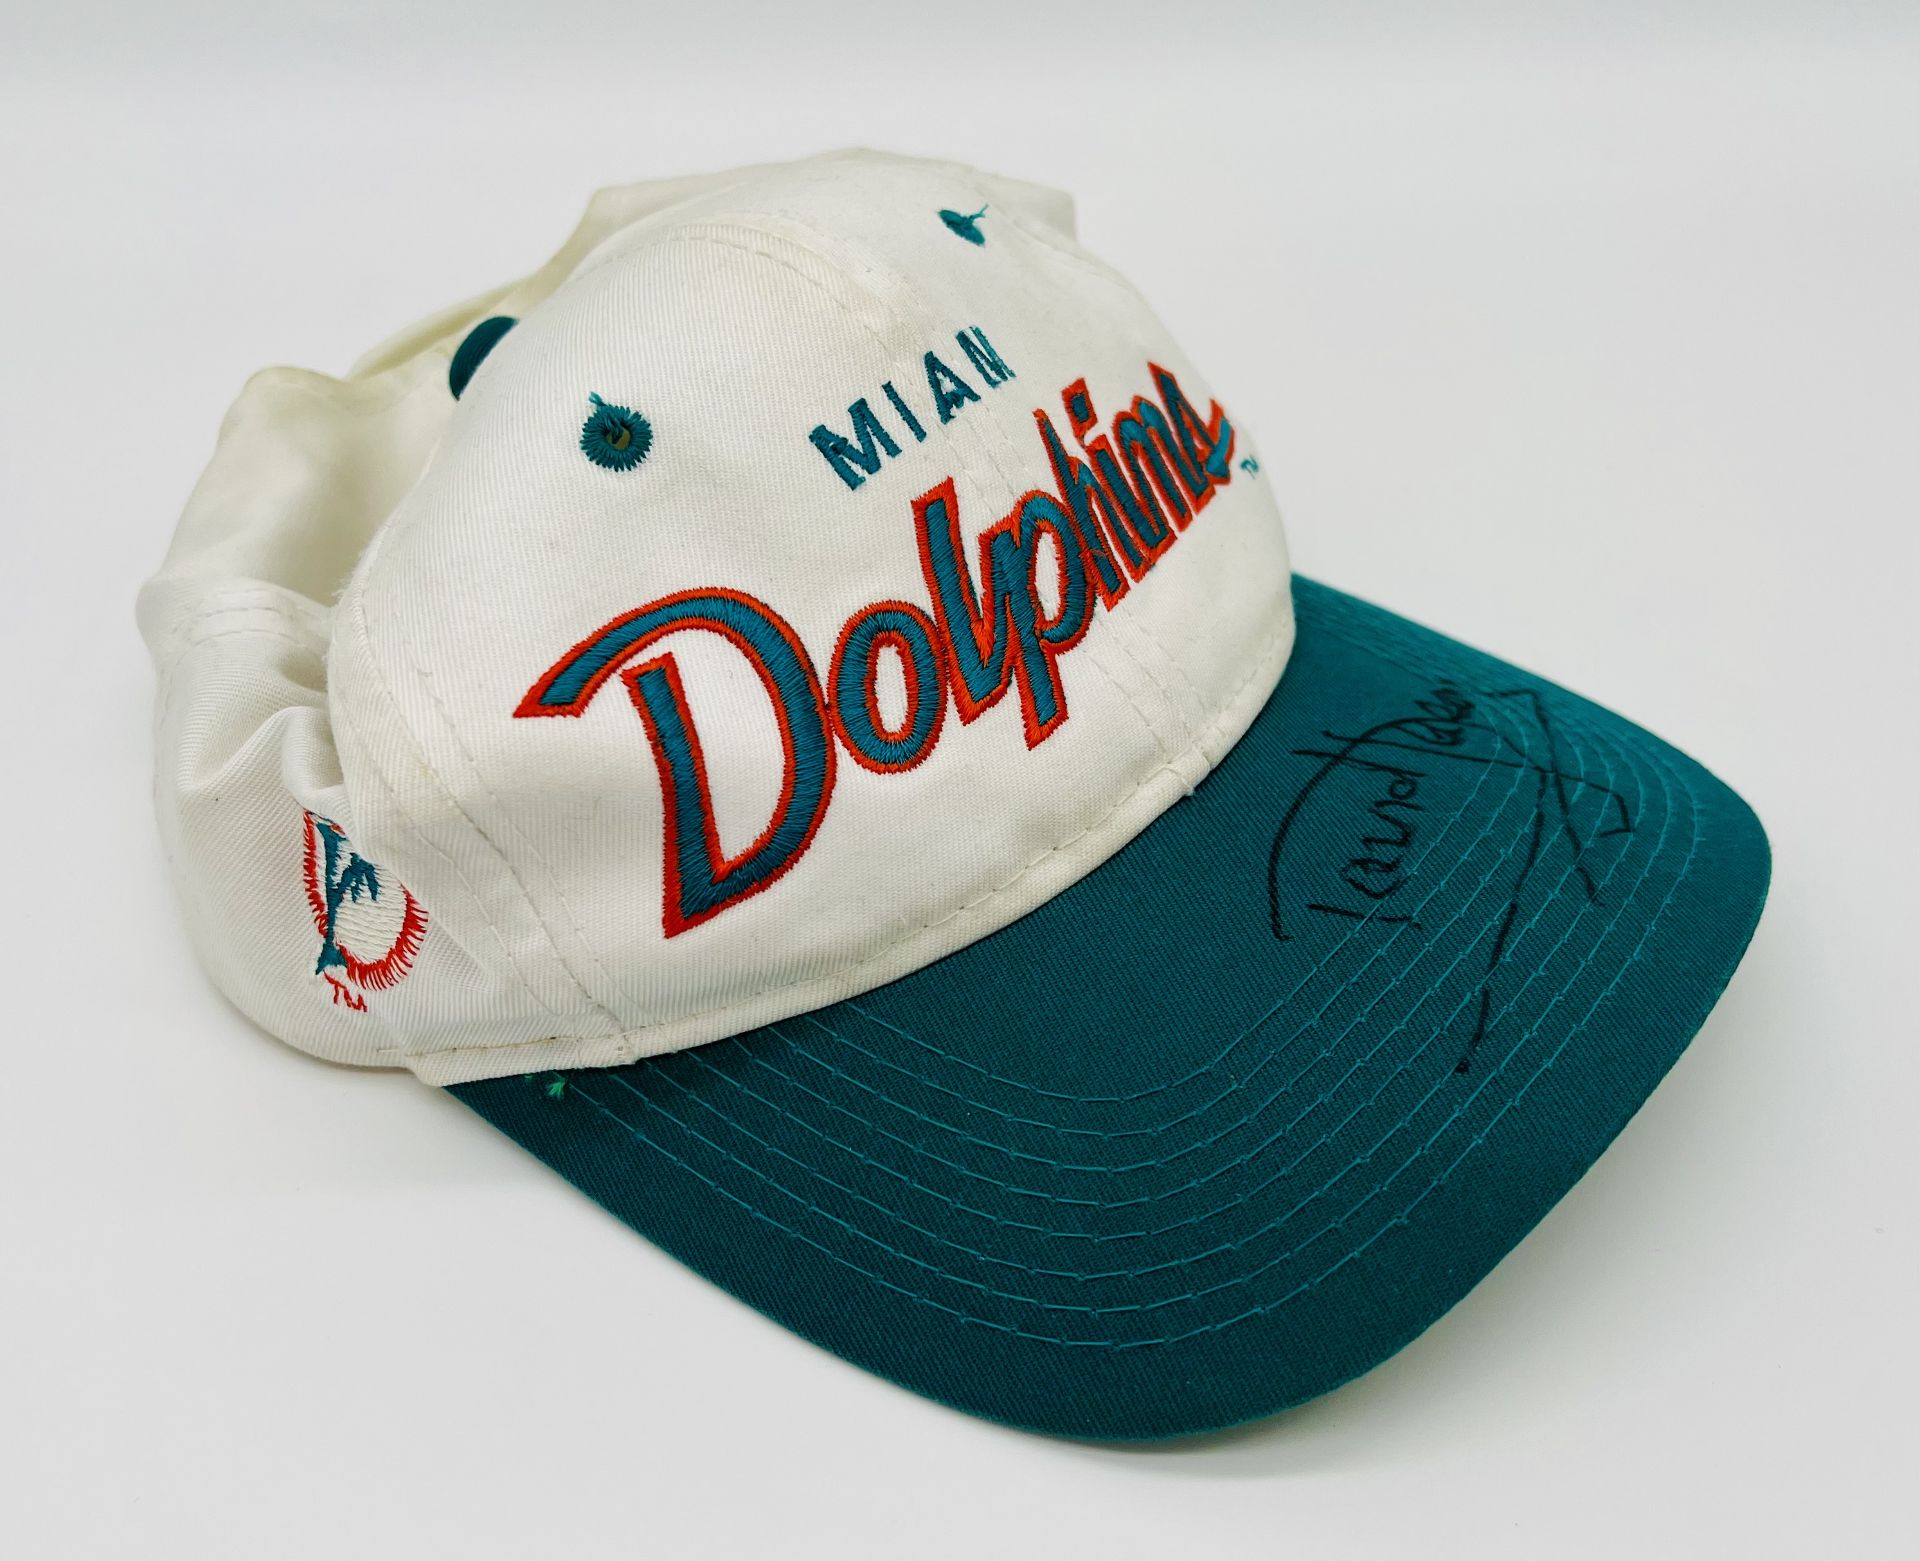 ONLY FOOLS & HORSES - MIAMI TWICE - MIAMI DOLPHINS AUTOGRAPHED CAP - Image 3 of 5